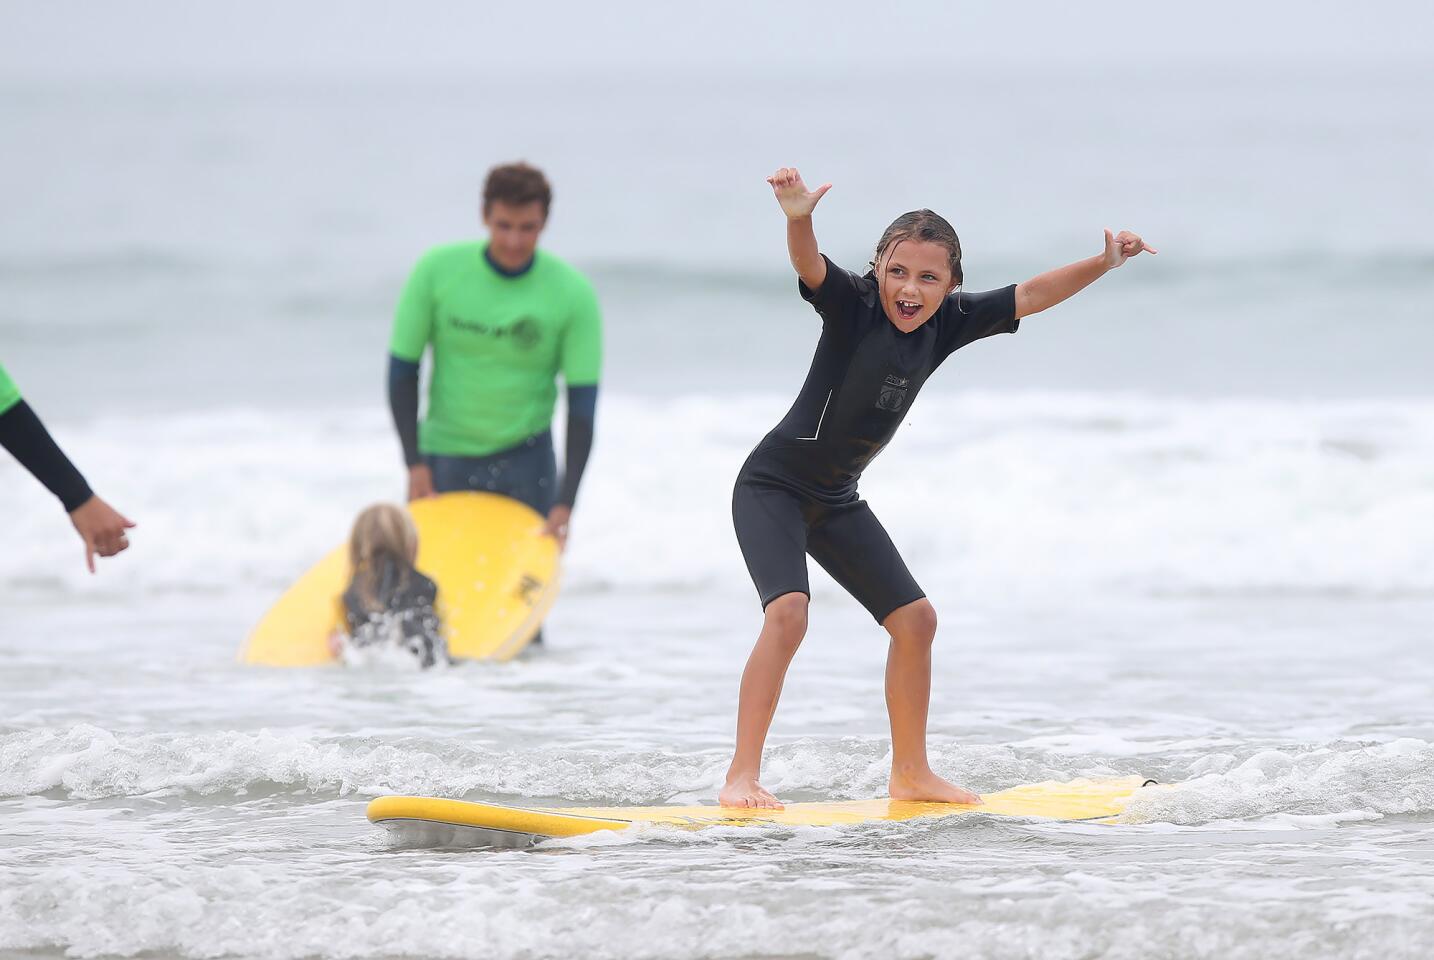 A youngster rides a small wave during an Erik Nelsen Surf Camp in Newport Beach on Tuesday.